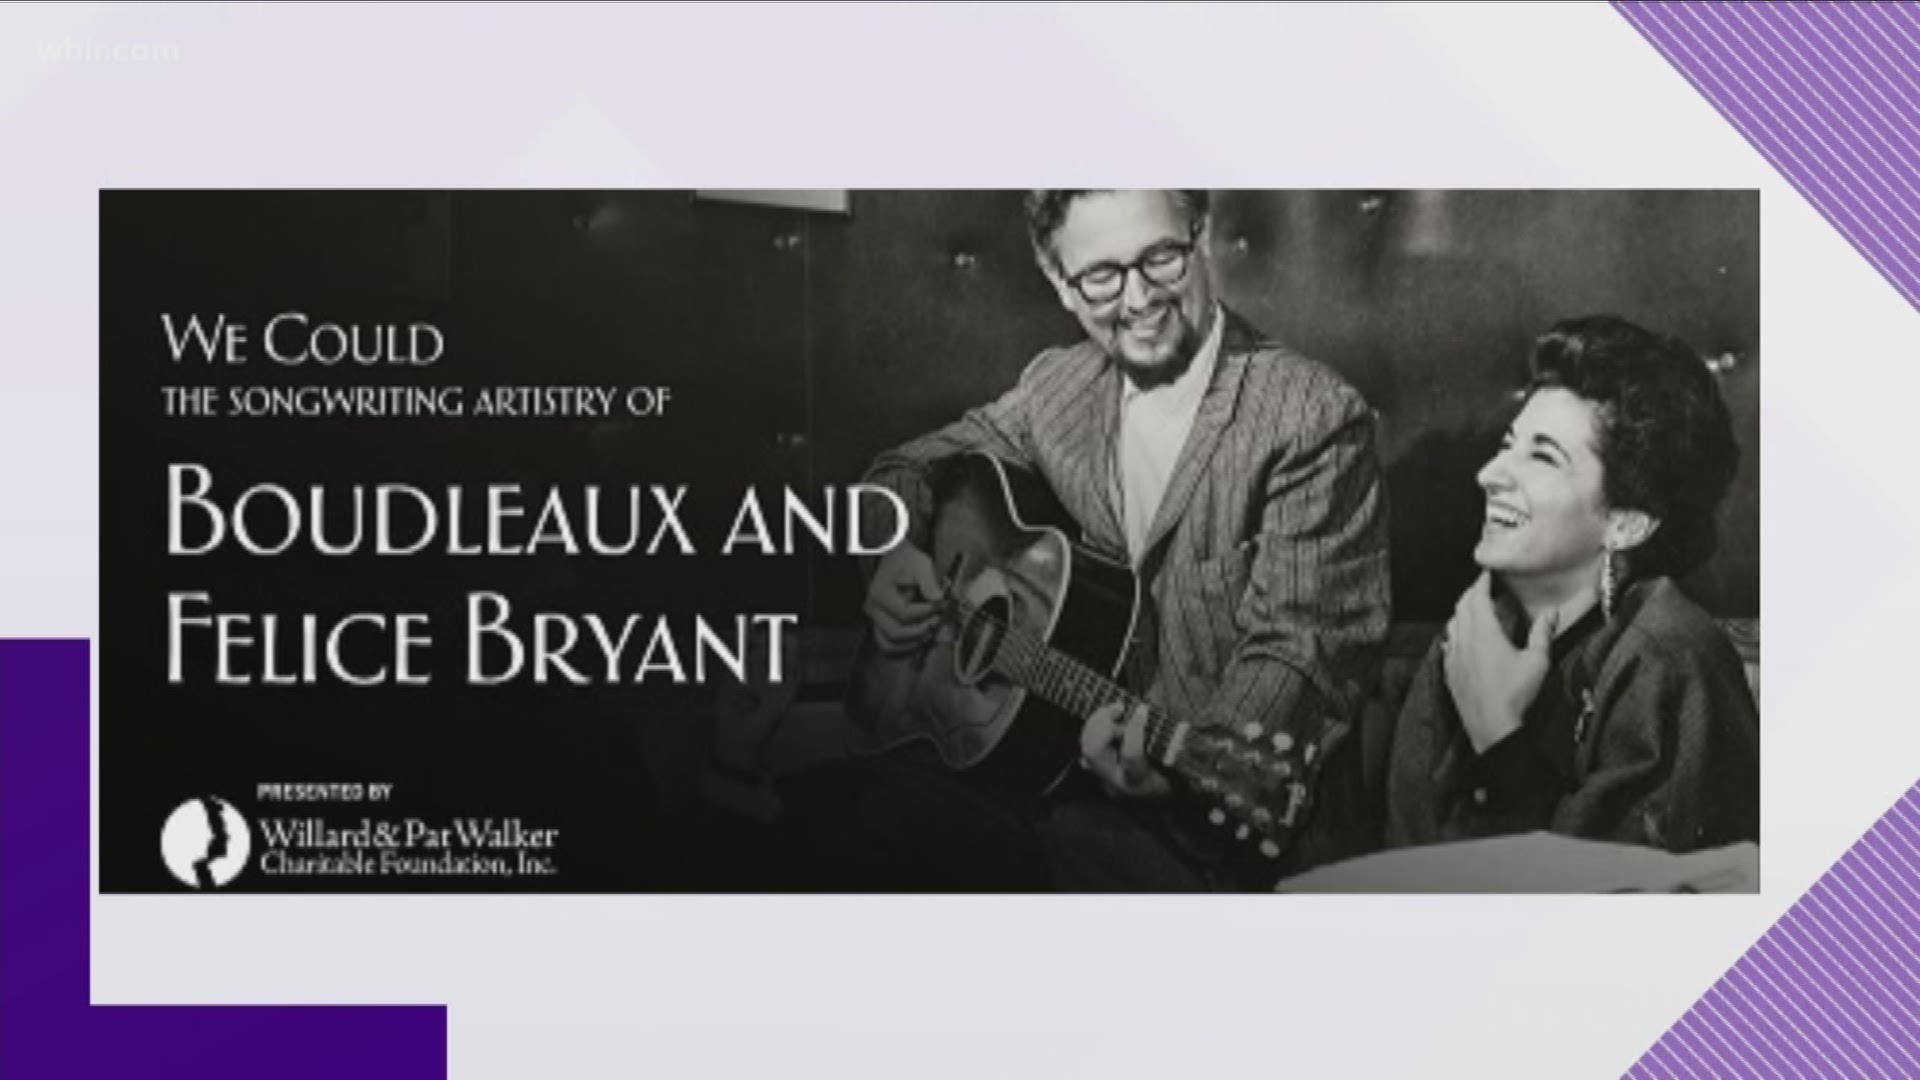 The Country Music Hall of Fame will open We Could: The songwriting artistry of Boudleaux & Felice Bryant, CountryMusicHallofFame.org. Sept. 26, 2019-4pm.